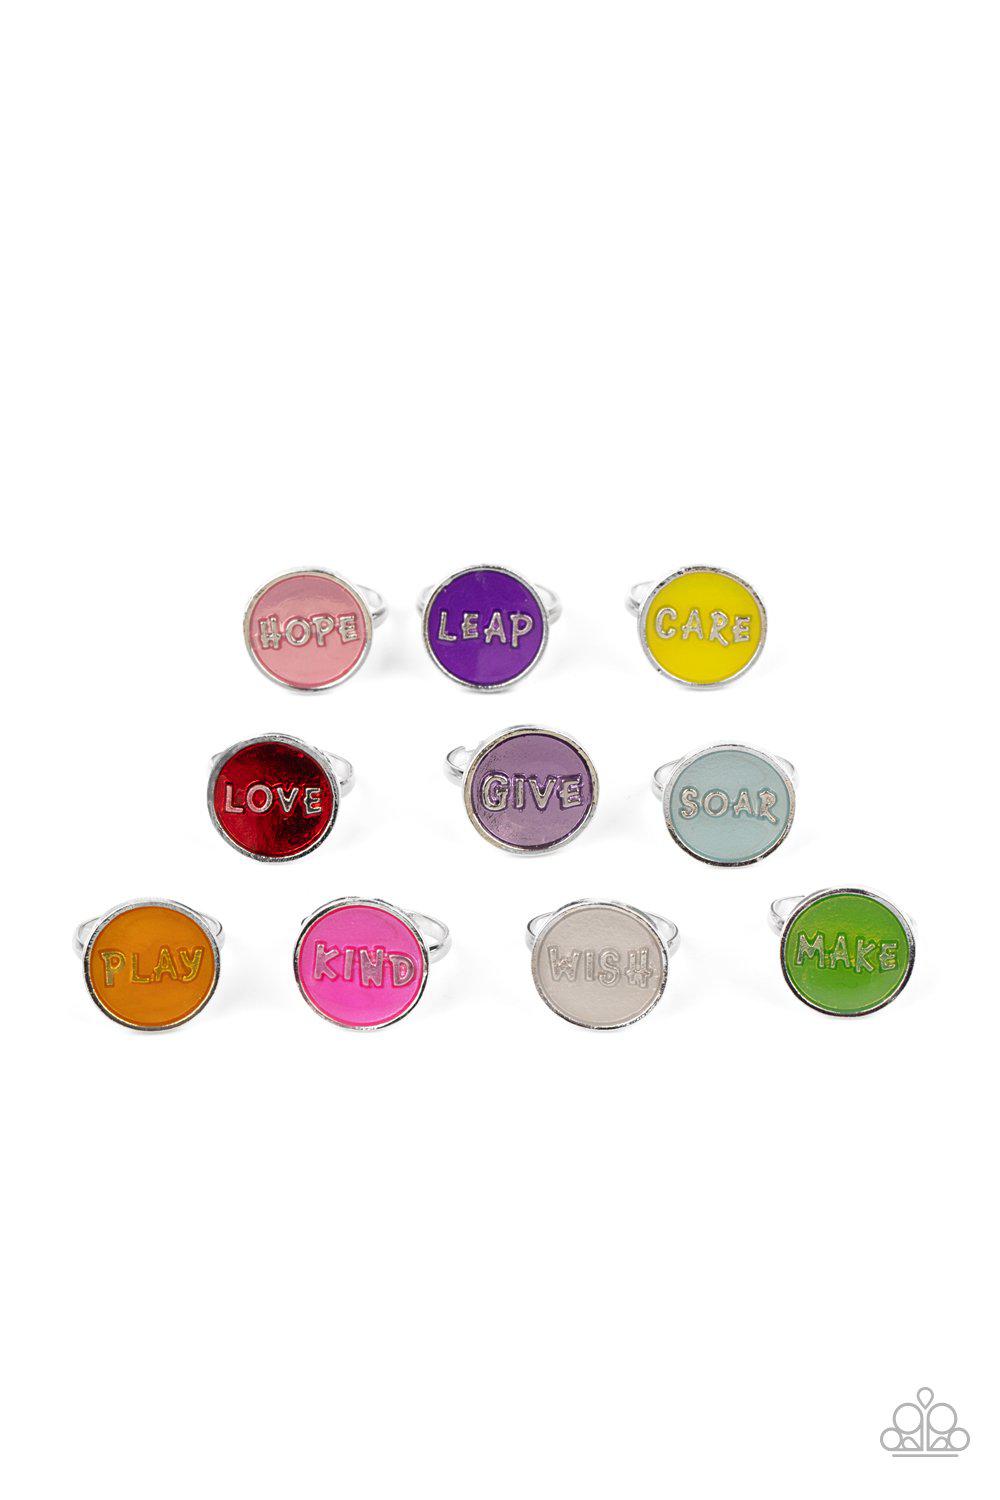 Starlet Shimmer Children's Colorful Inspirational Rings - Paparazzi Accessories (set of 10) - Full set -CarasShop.com - $5 Jewelry by Cara Jewels